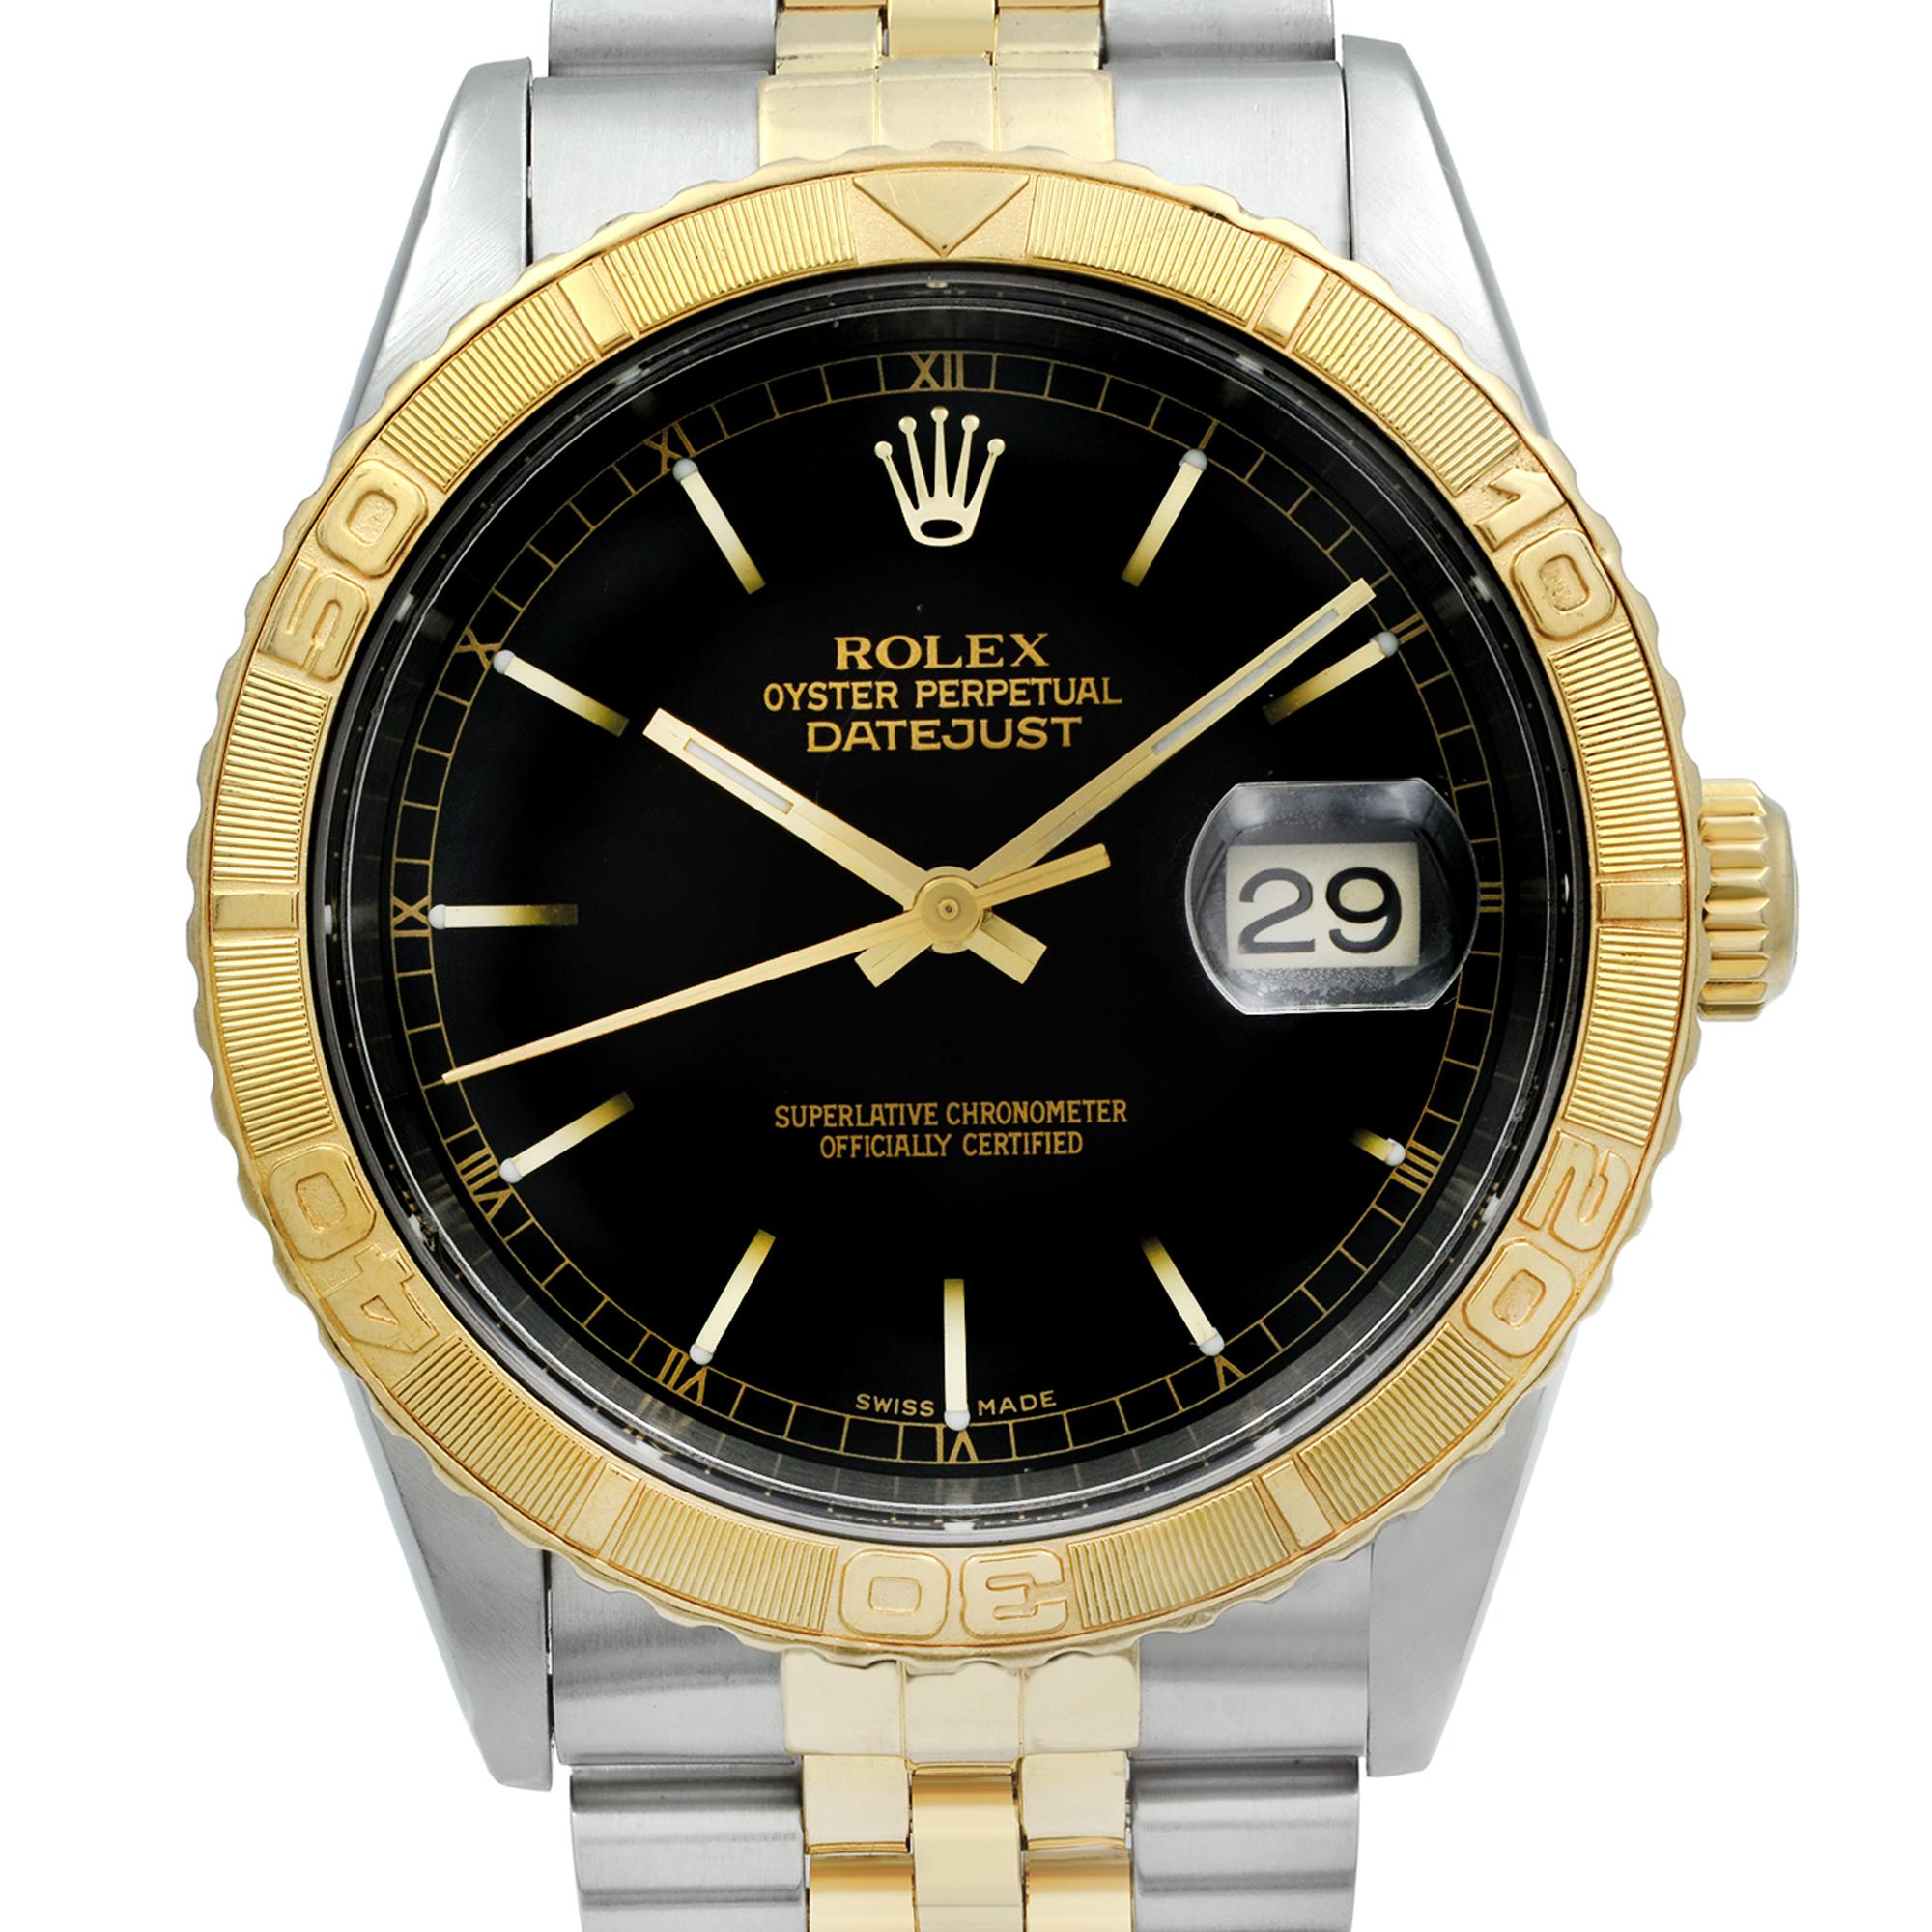 Pre-owned and has a Minor slack on the bracelet.  Turnogprah Rotating Bezel. Manufacturers box and papers are not included. Backed by a 1-year warranty provided by Chronostore.
Details:
Brand Rolex
Department Men
Model Number 16263
Model Rolex